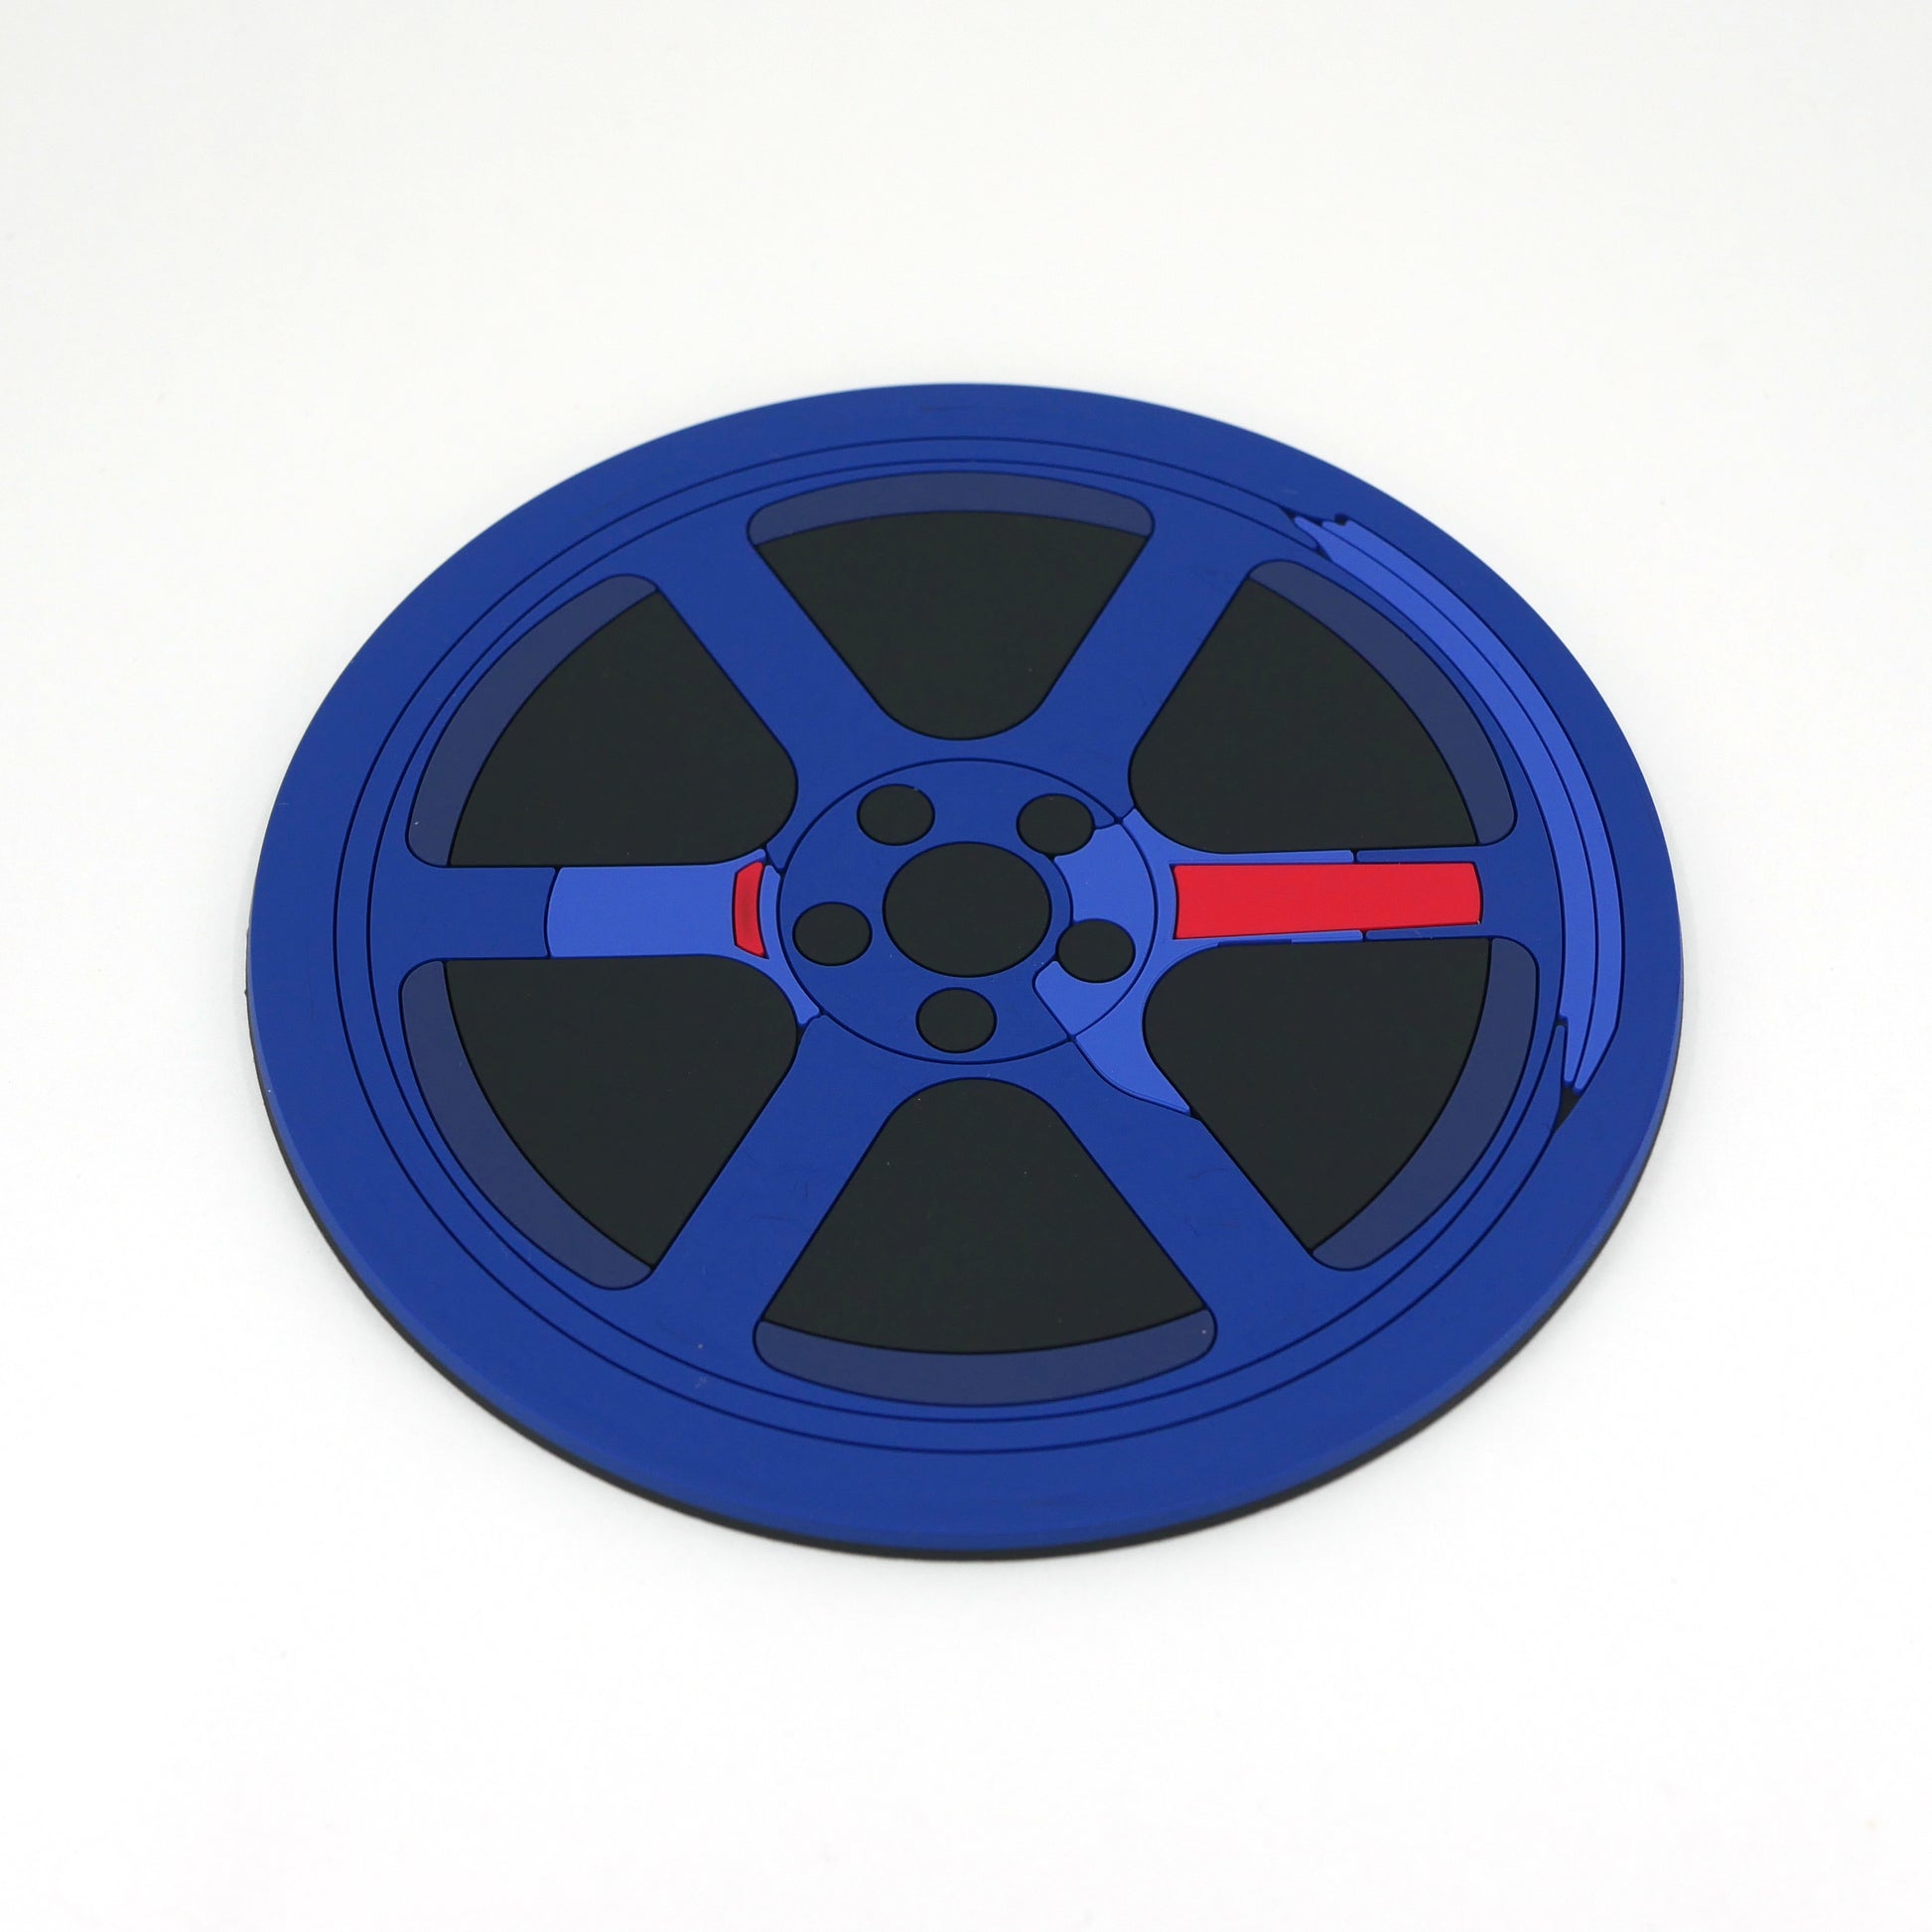 The front of a blue TE wheel PVC rubber coaster.